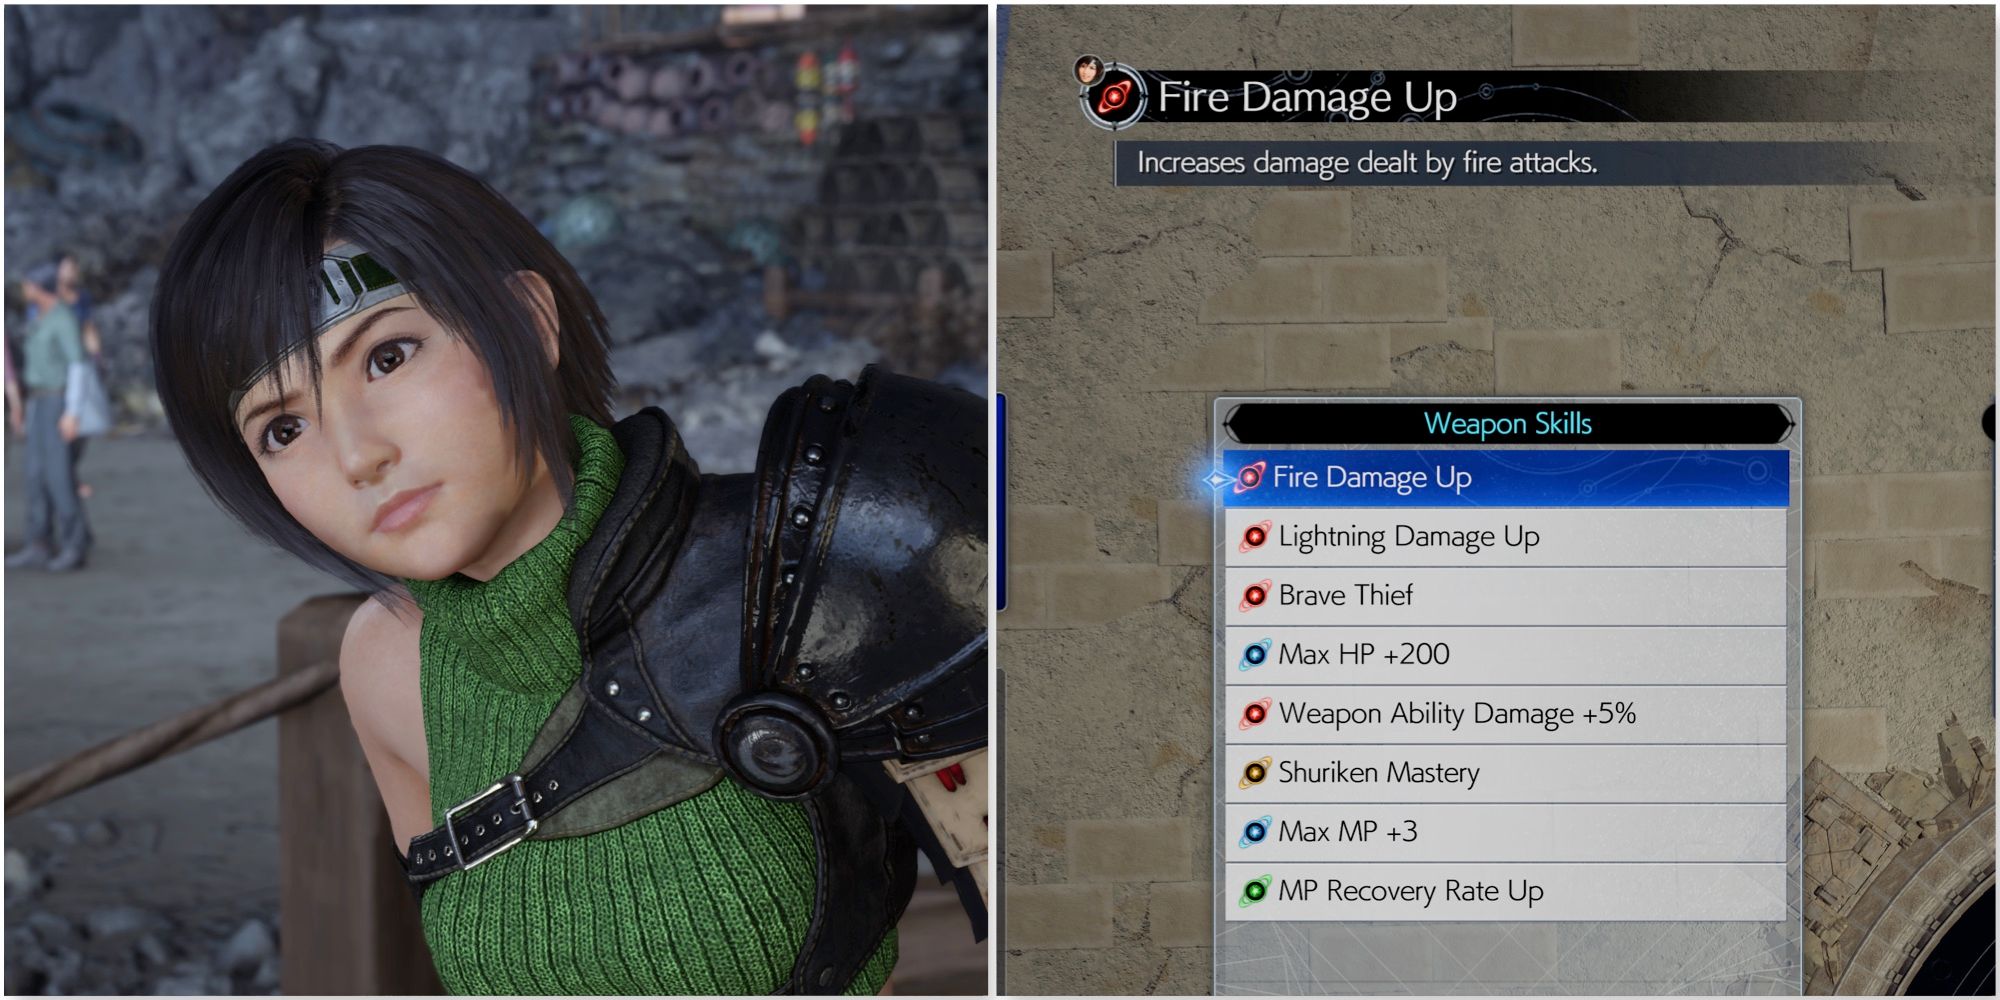 Yuffie and Fire Damage Up weapon skill in Final Fantasy 7 Rebirth